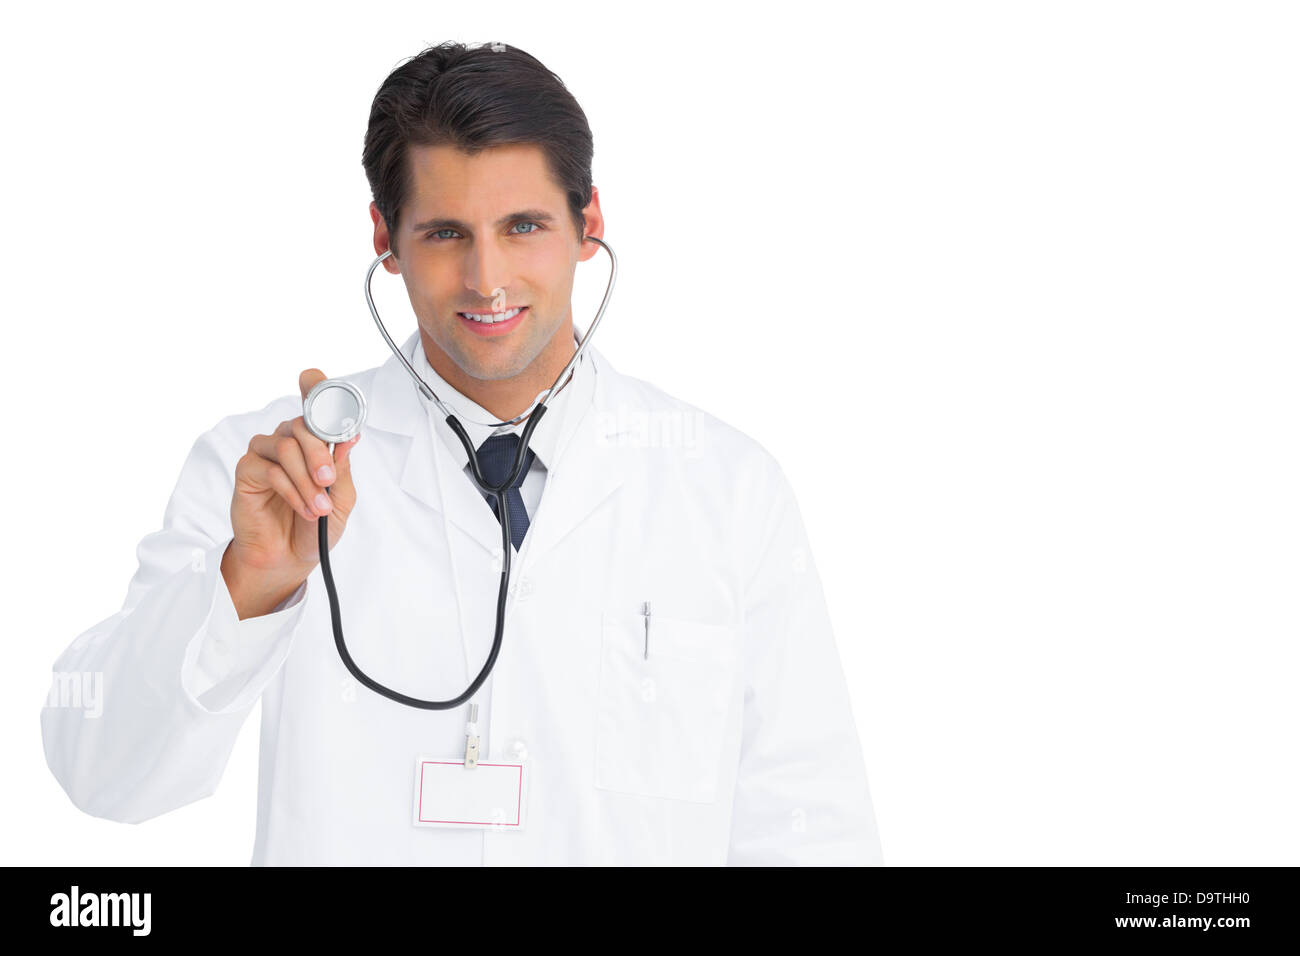 Happy doctor holding up stethoscope Banque D'Images